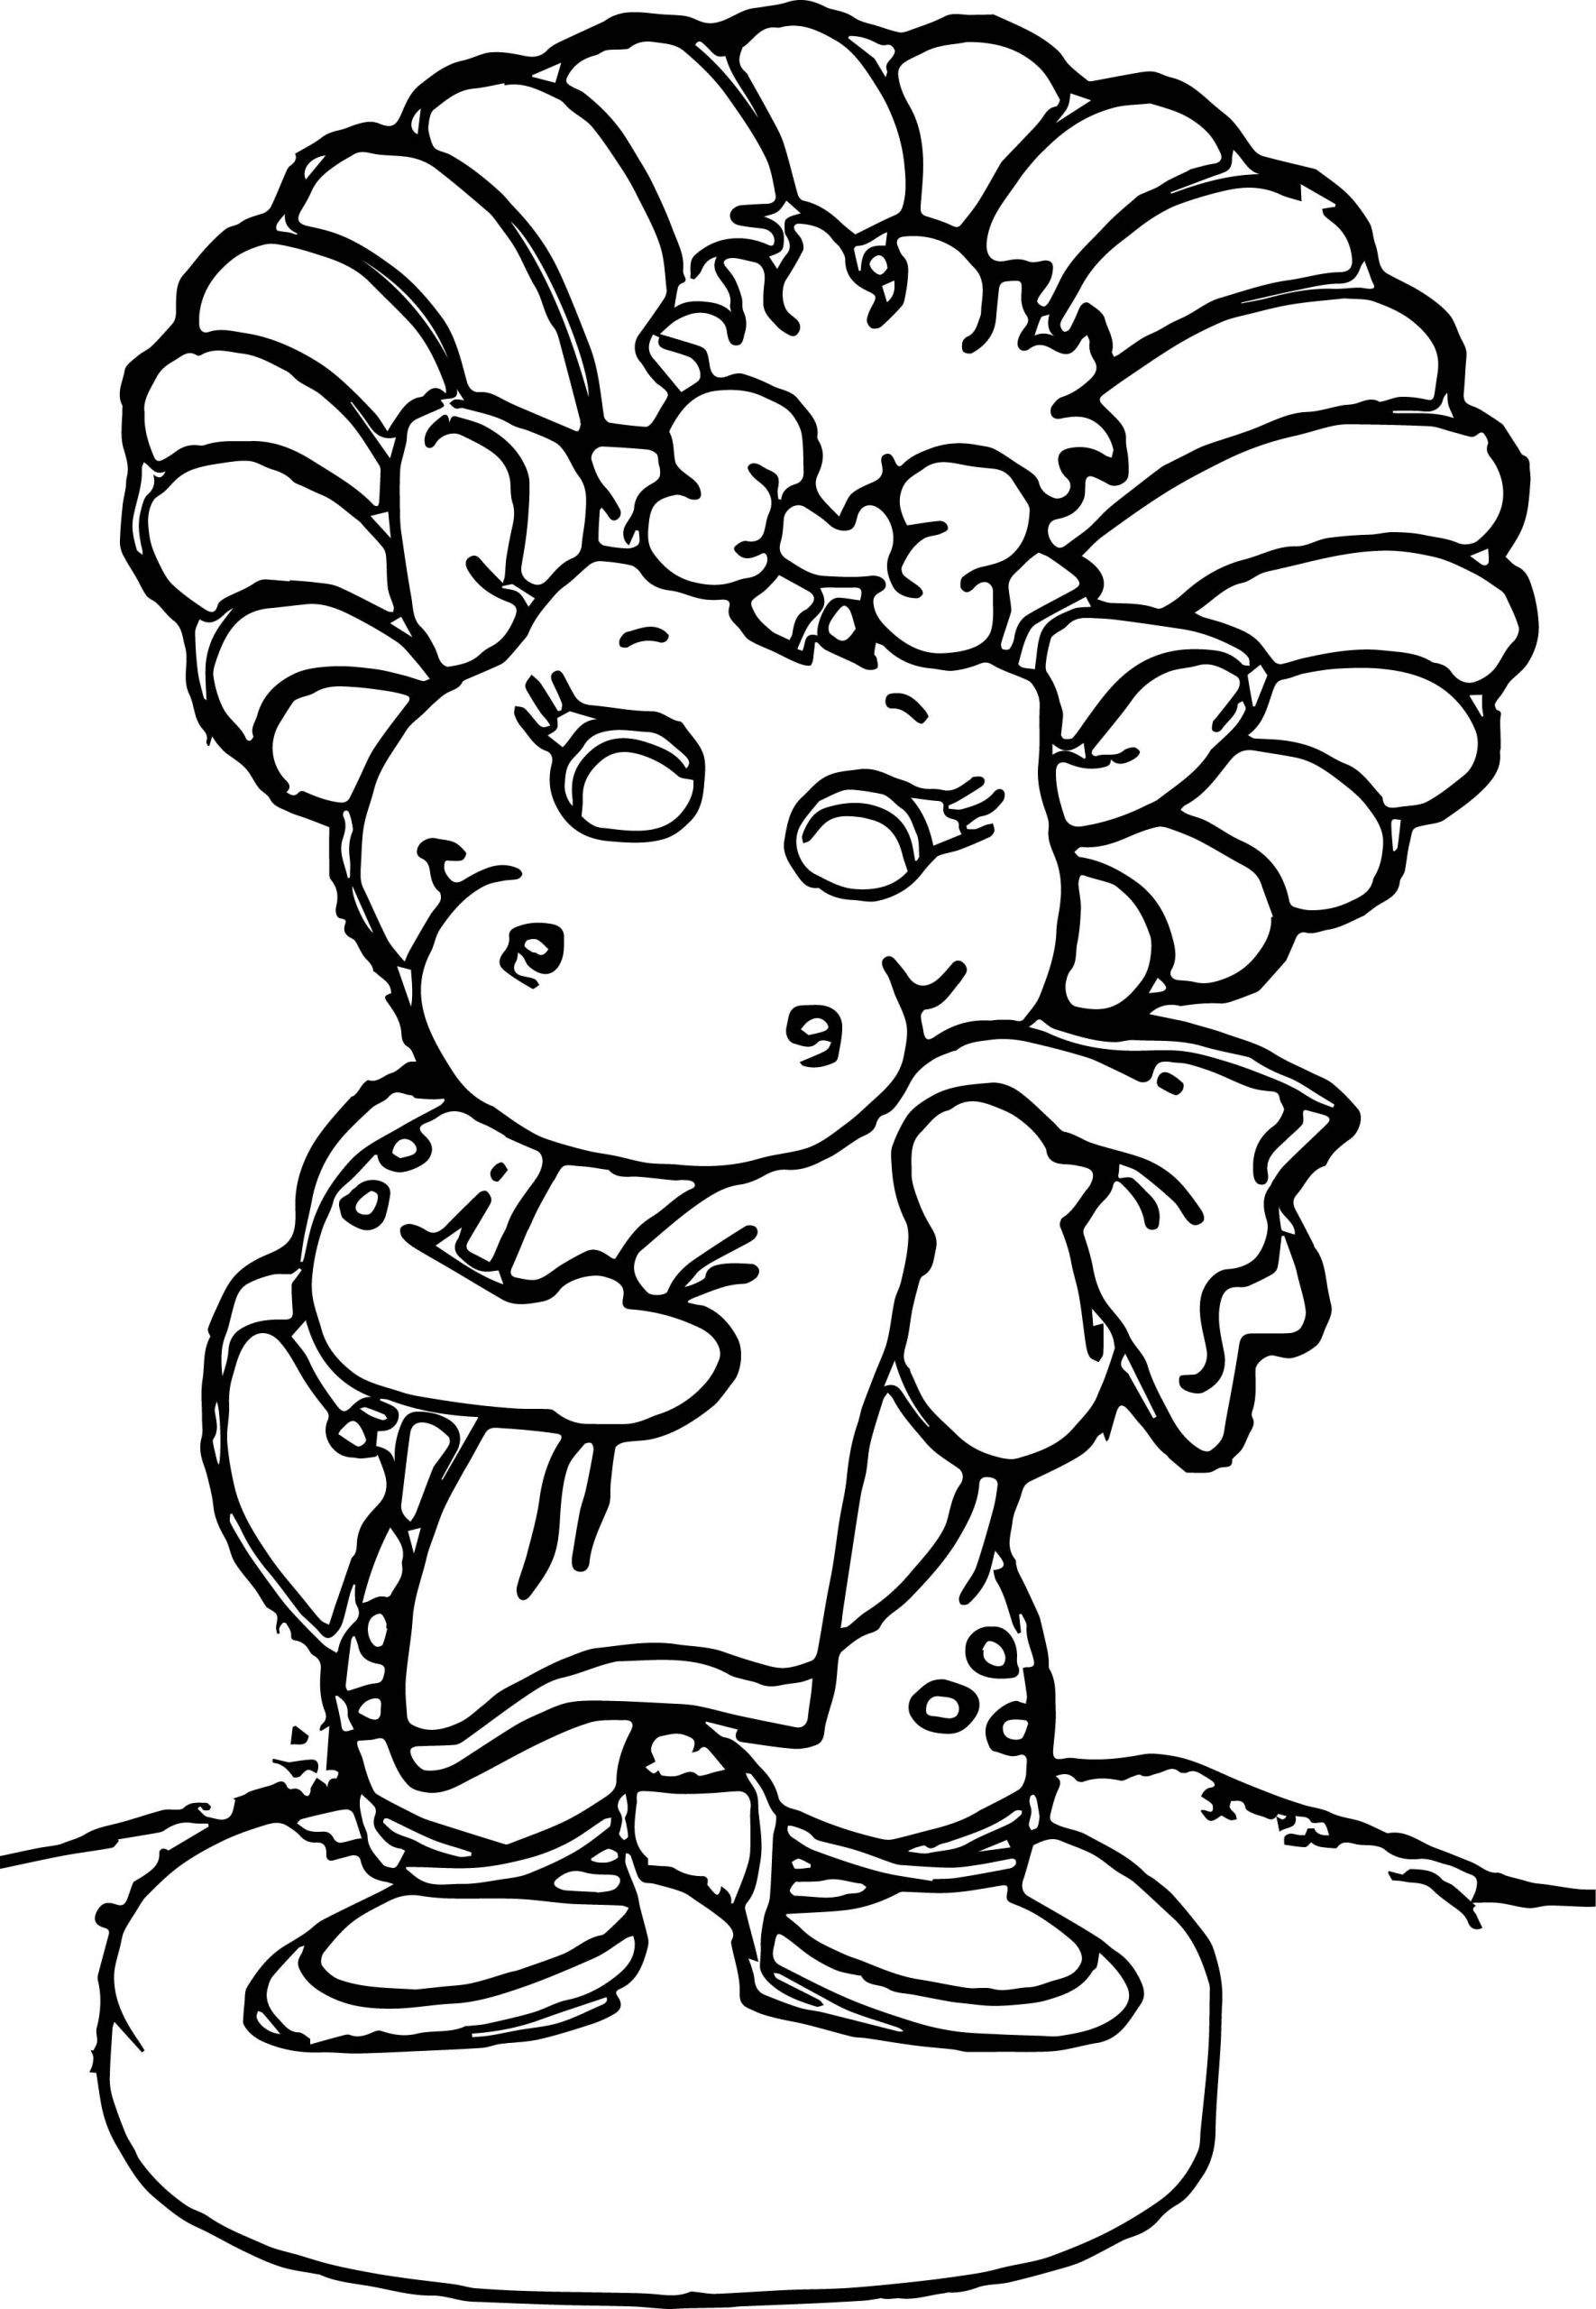 Baby Bop Coloring Pages
 Barney Baby Bop Birthday Party Centerpiece And Party